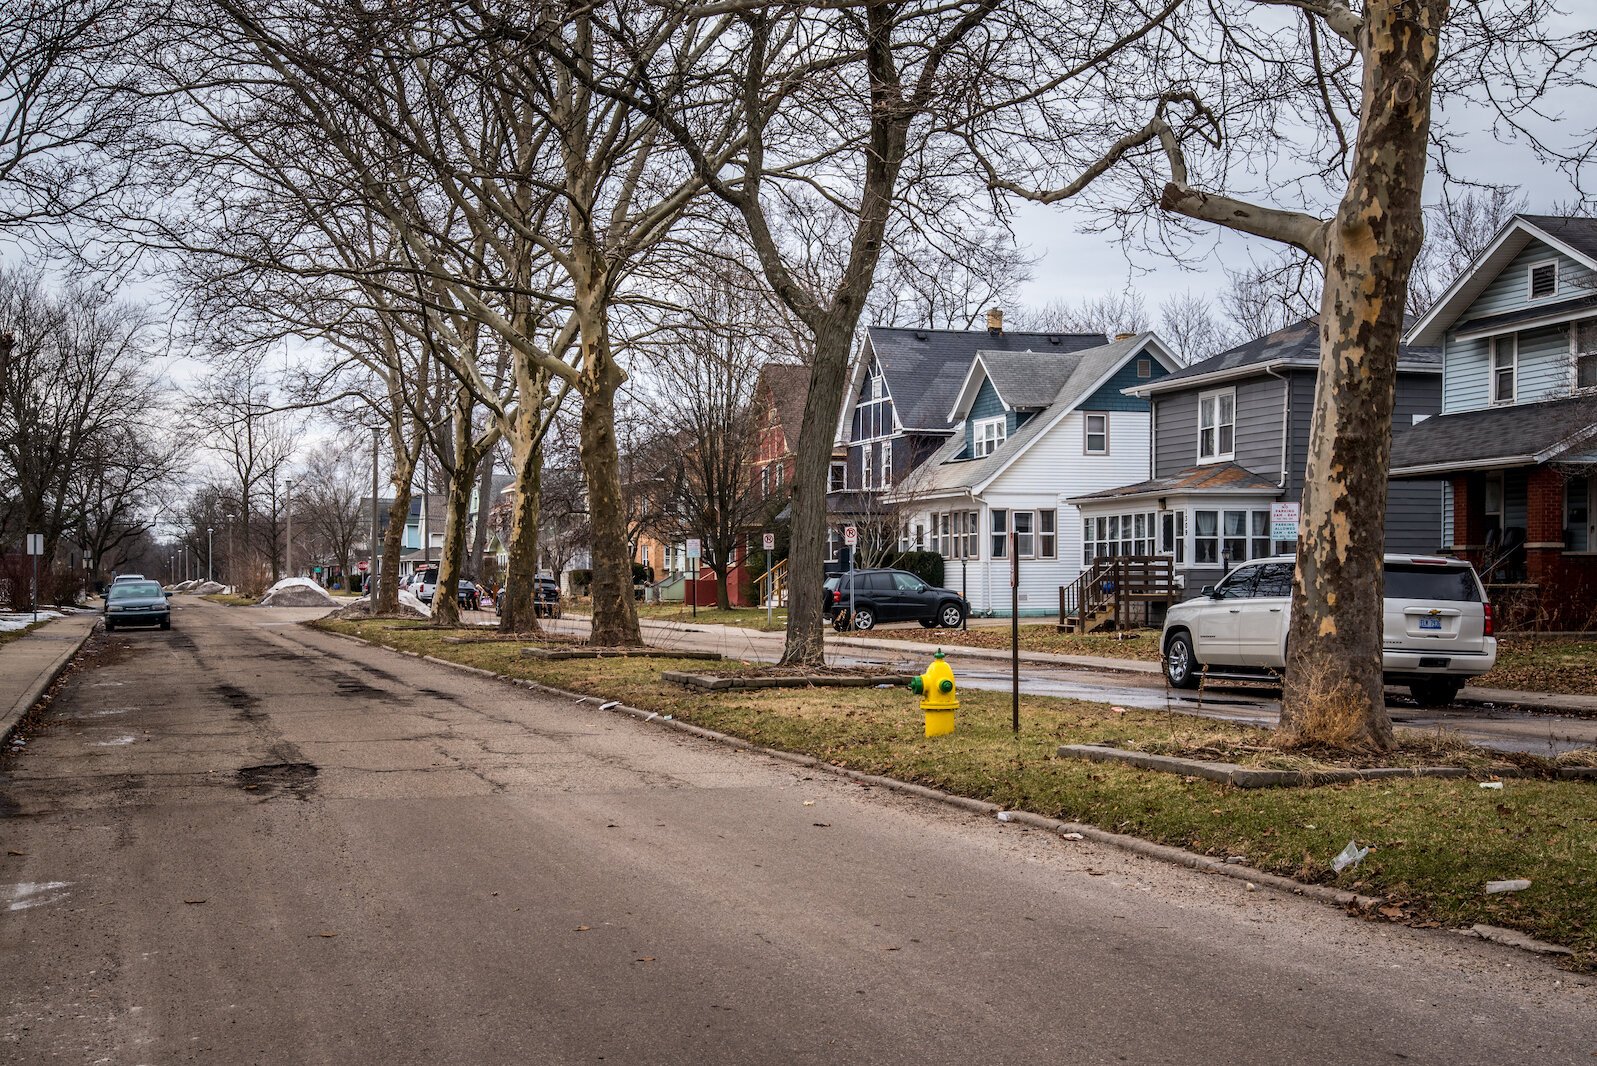 Among the housing concerns in Kalamazoo County, researchers found rising costs have put most moderate- and low-income earners into situations where they are paying more in rent or ownership costs than what is financially sustainable.